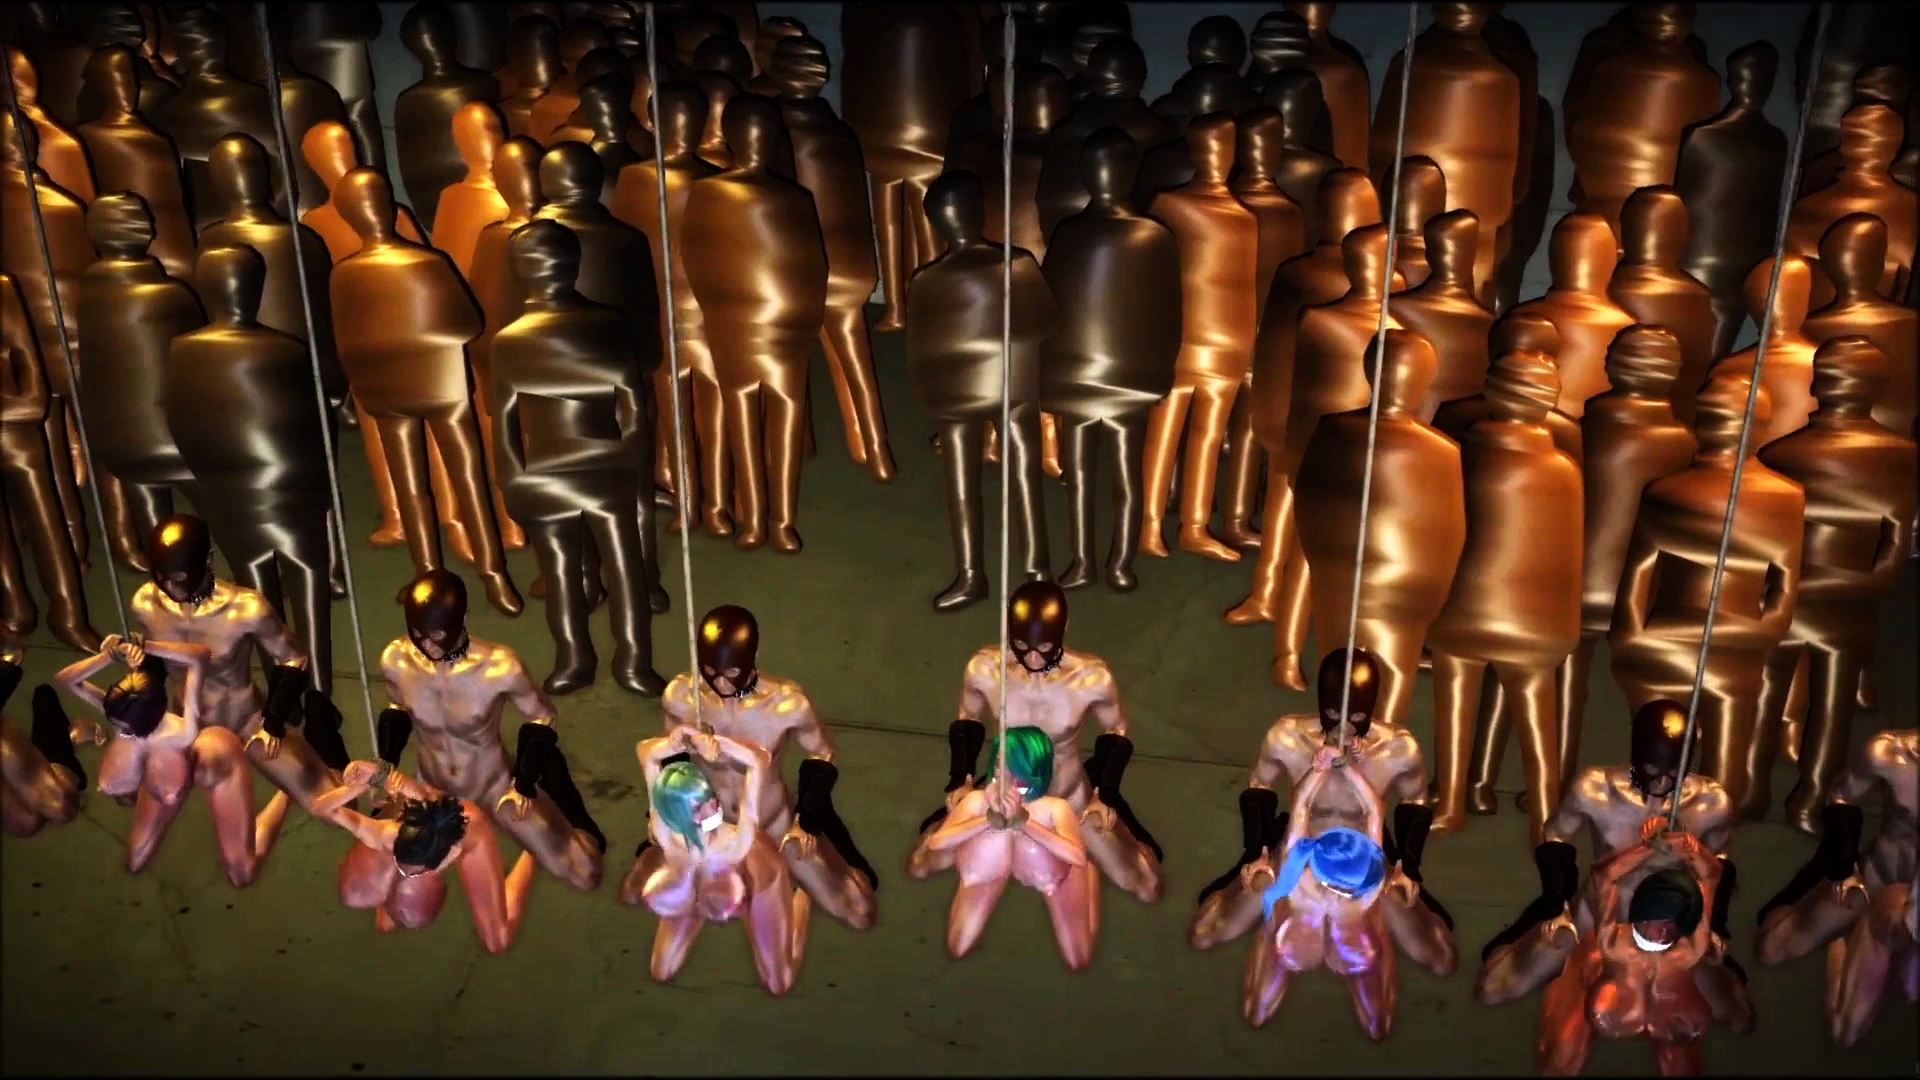 Bodacious 3D Bombshells Pumped Full Of Cock In A Wild Orgy Video at Porn Lib